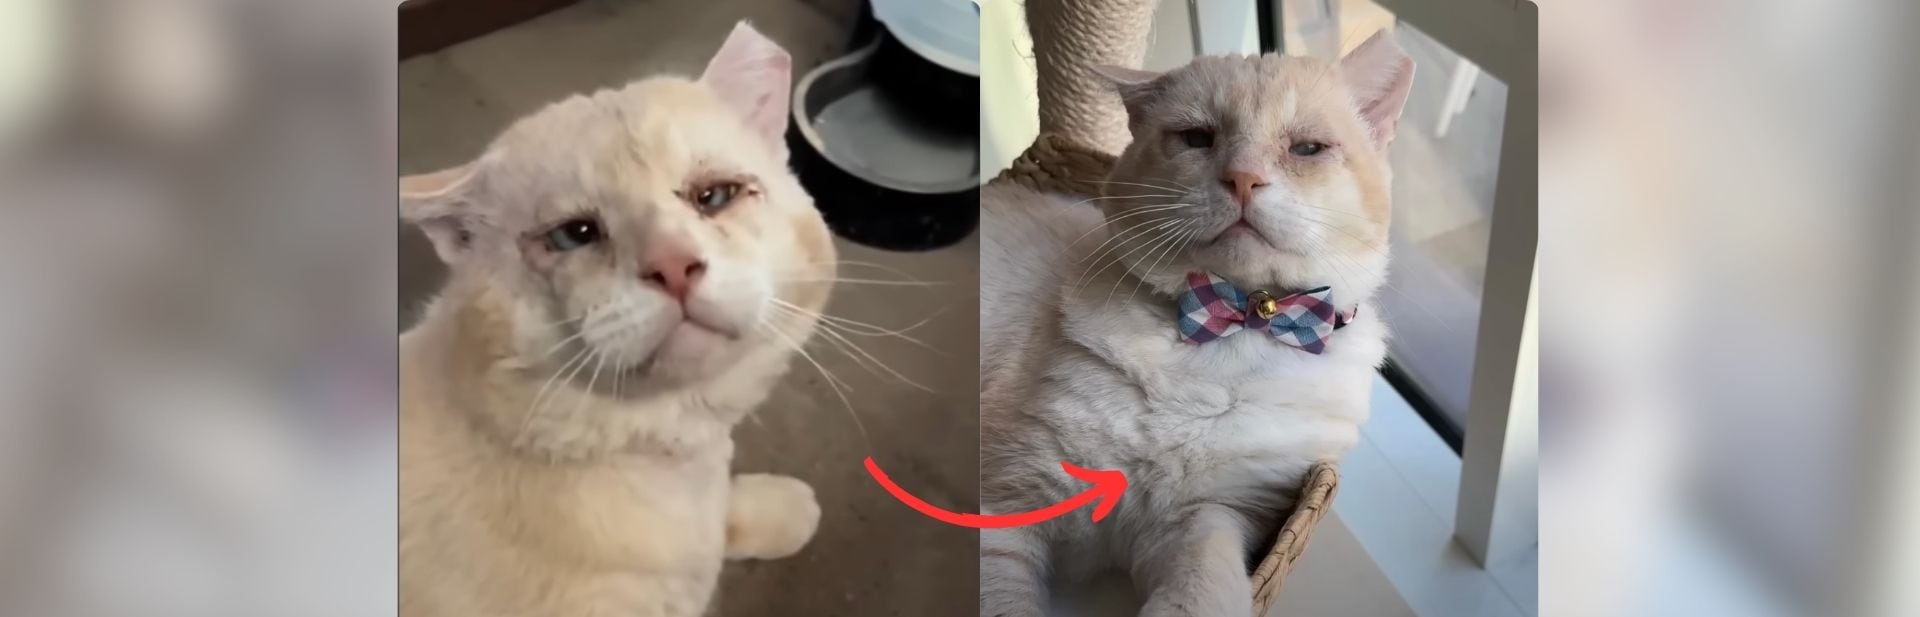 Gentle Feline Overcomes Bullies and Blindness to Find Happiness